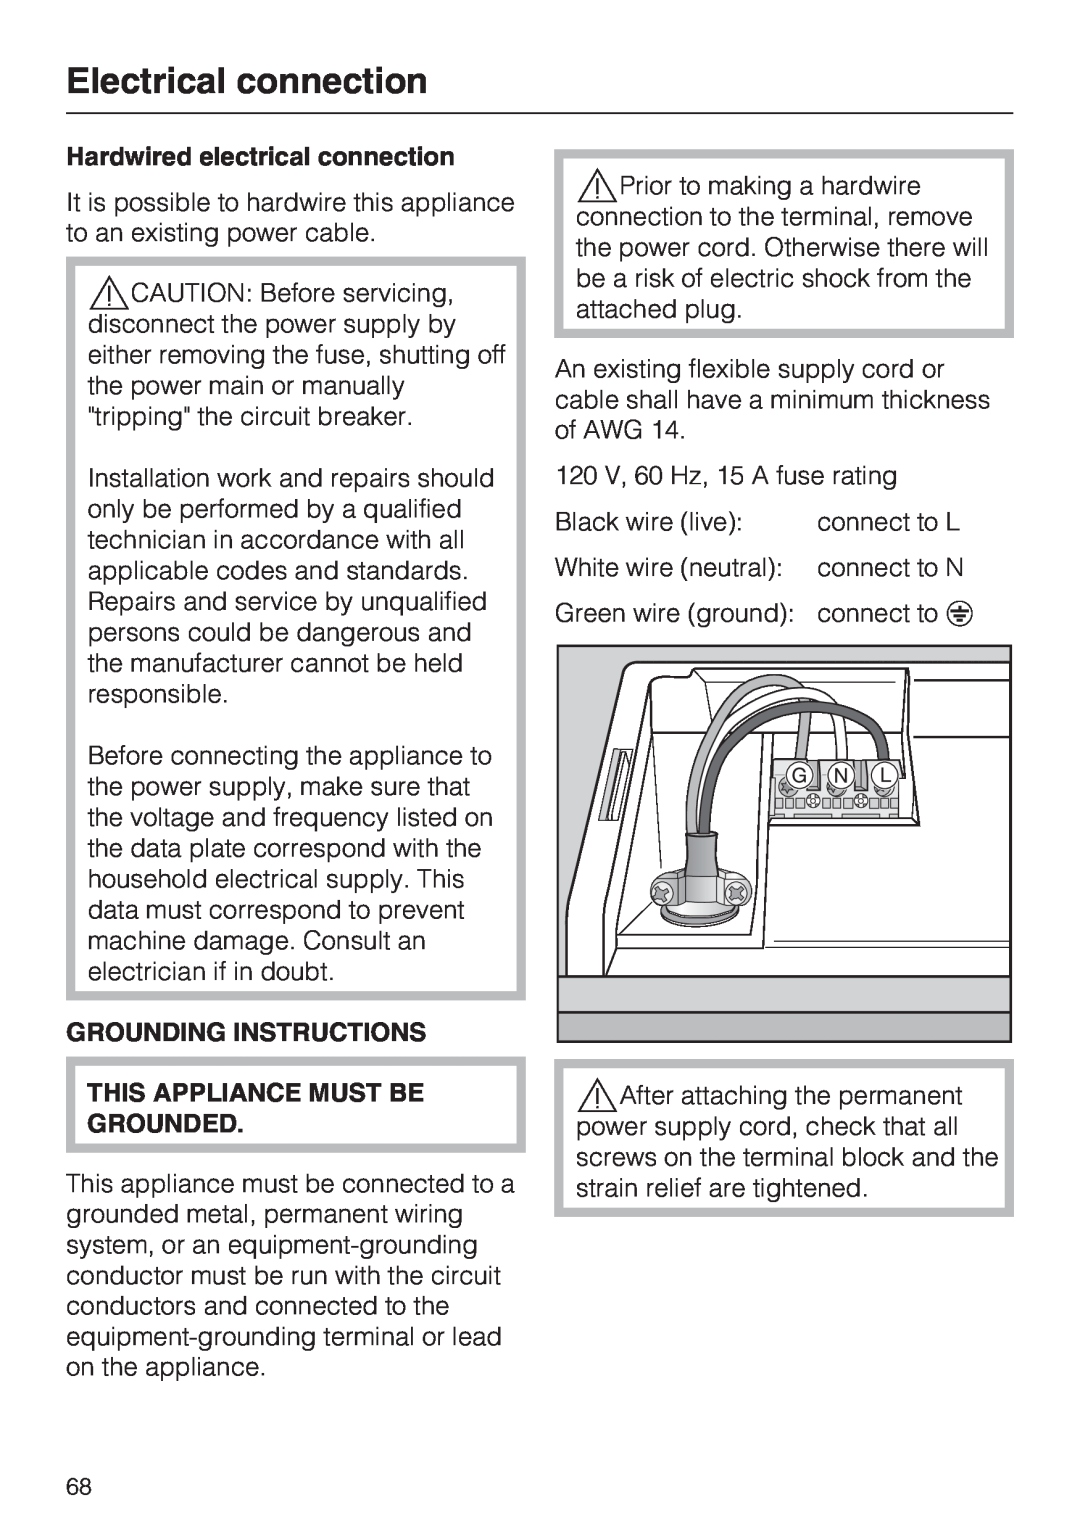 Miele G 5775, G 5770 manual Electrical connection, Hardwired electrical connection, Grounding Instructions 